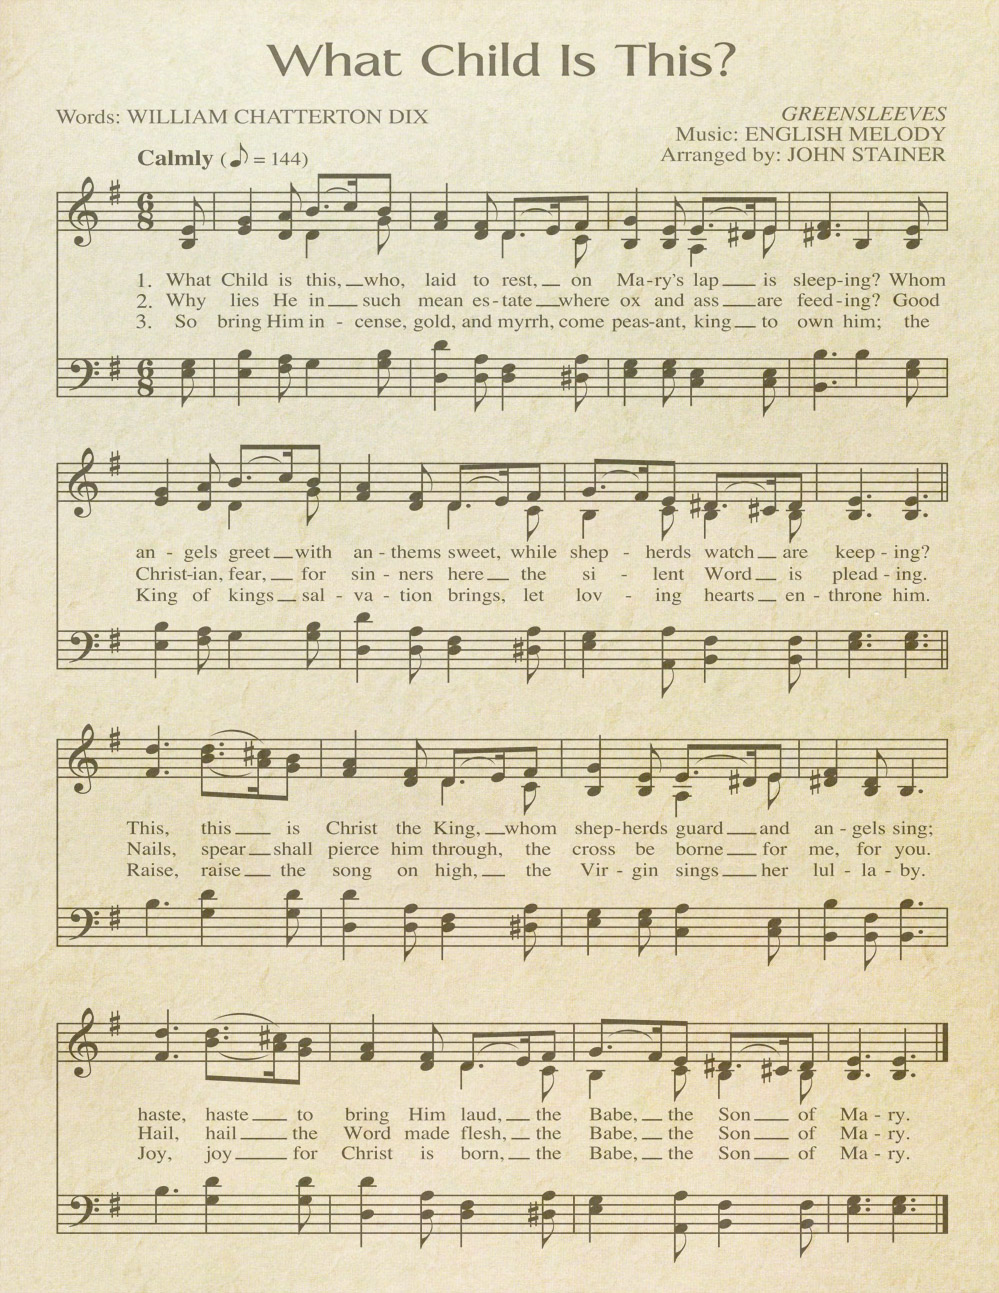 What Child Is This "Aged" Sheet Music